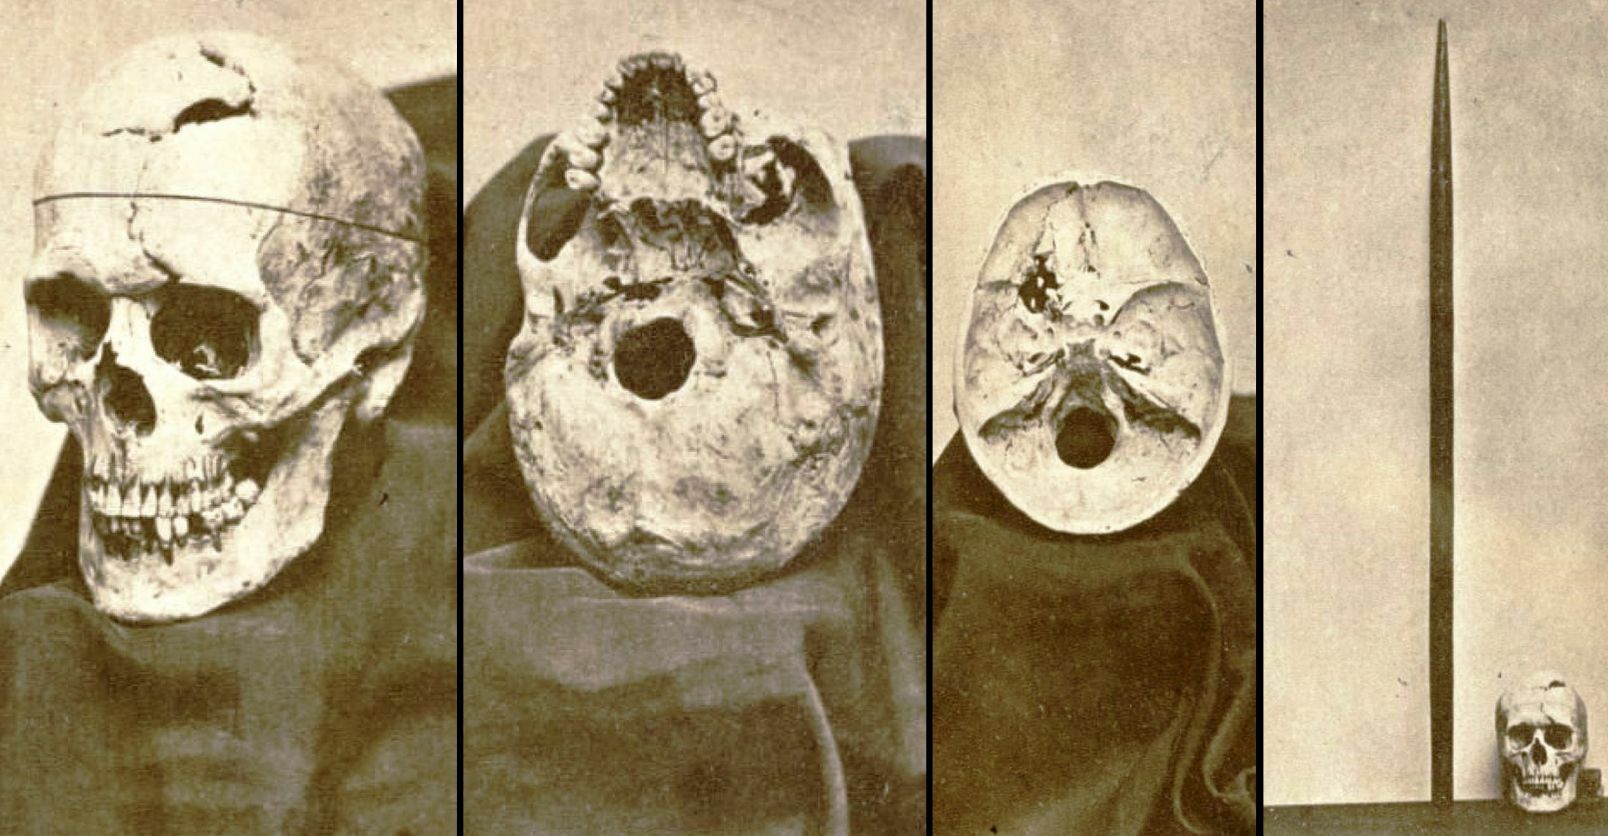 Gage's brother-in-law (a San Fran­cis­co city offi­cial) and his fam­i­ly per­son­al­ly de­liv­ered Gage's skull and iron to Harlow.